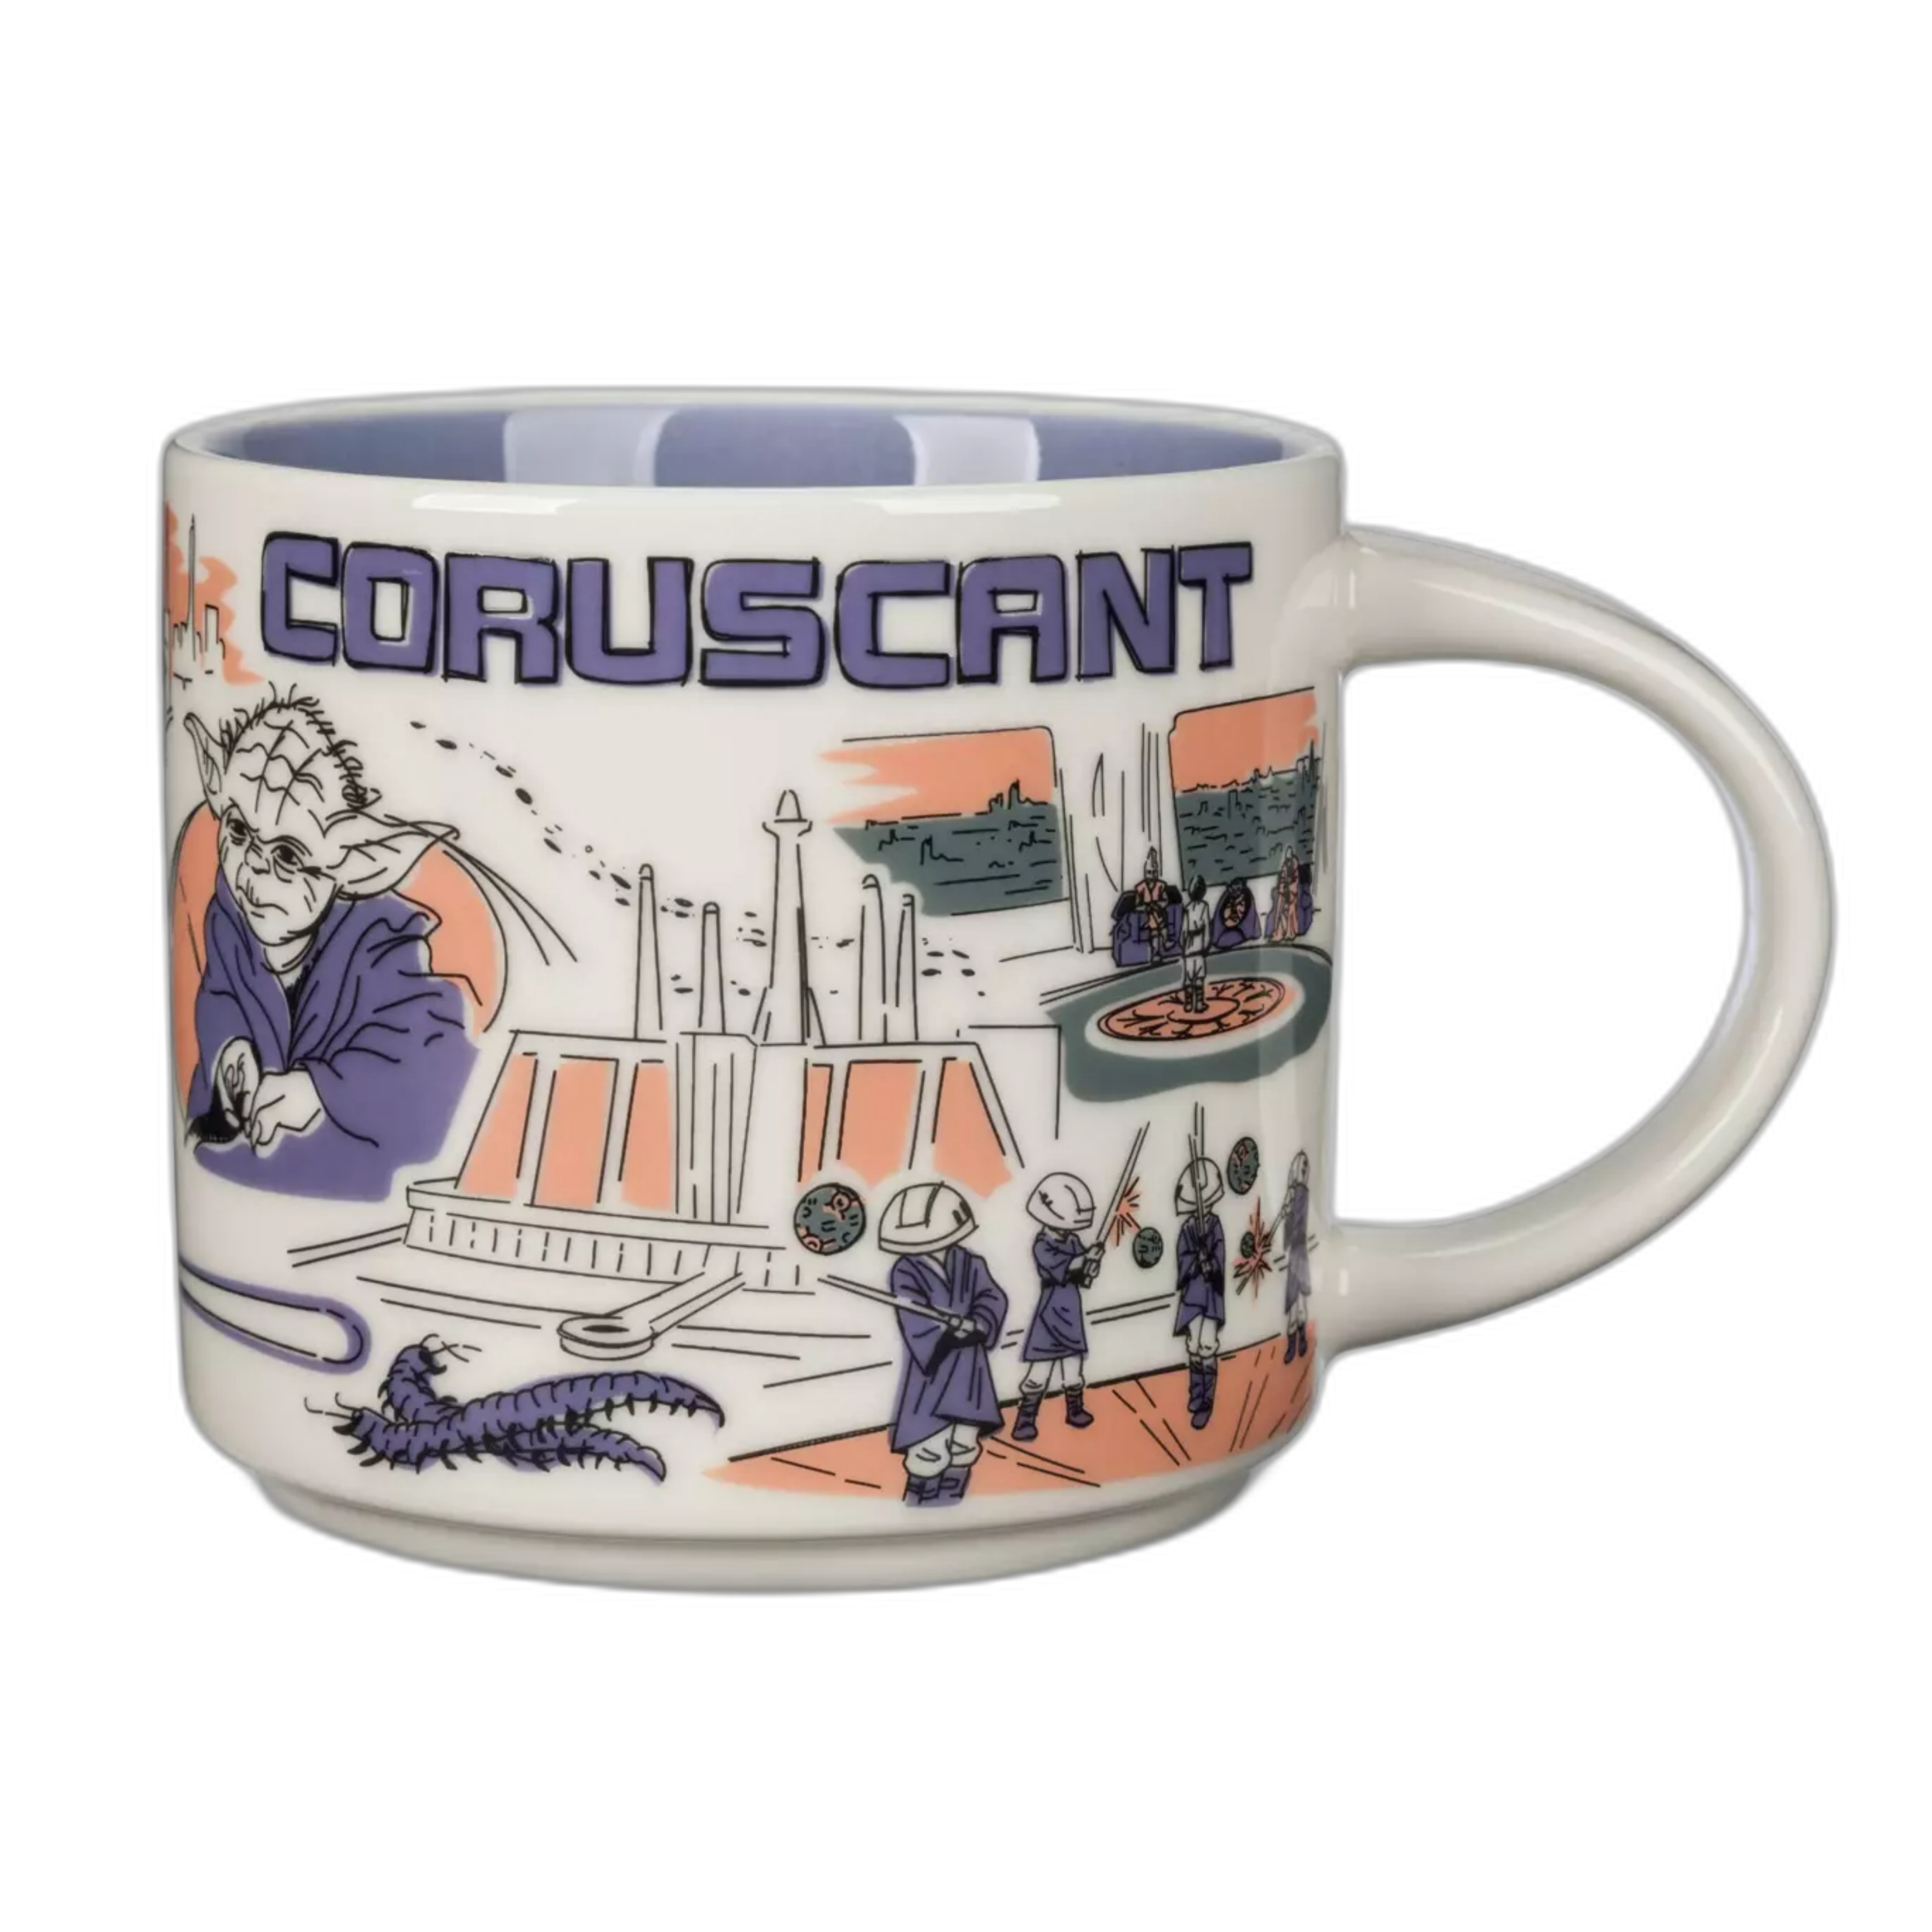 Star Wars Coruscant Mug from the Been There Series, with artwork from the movies.